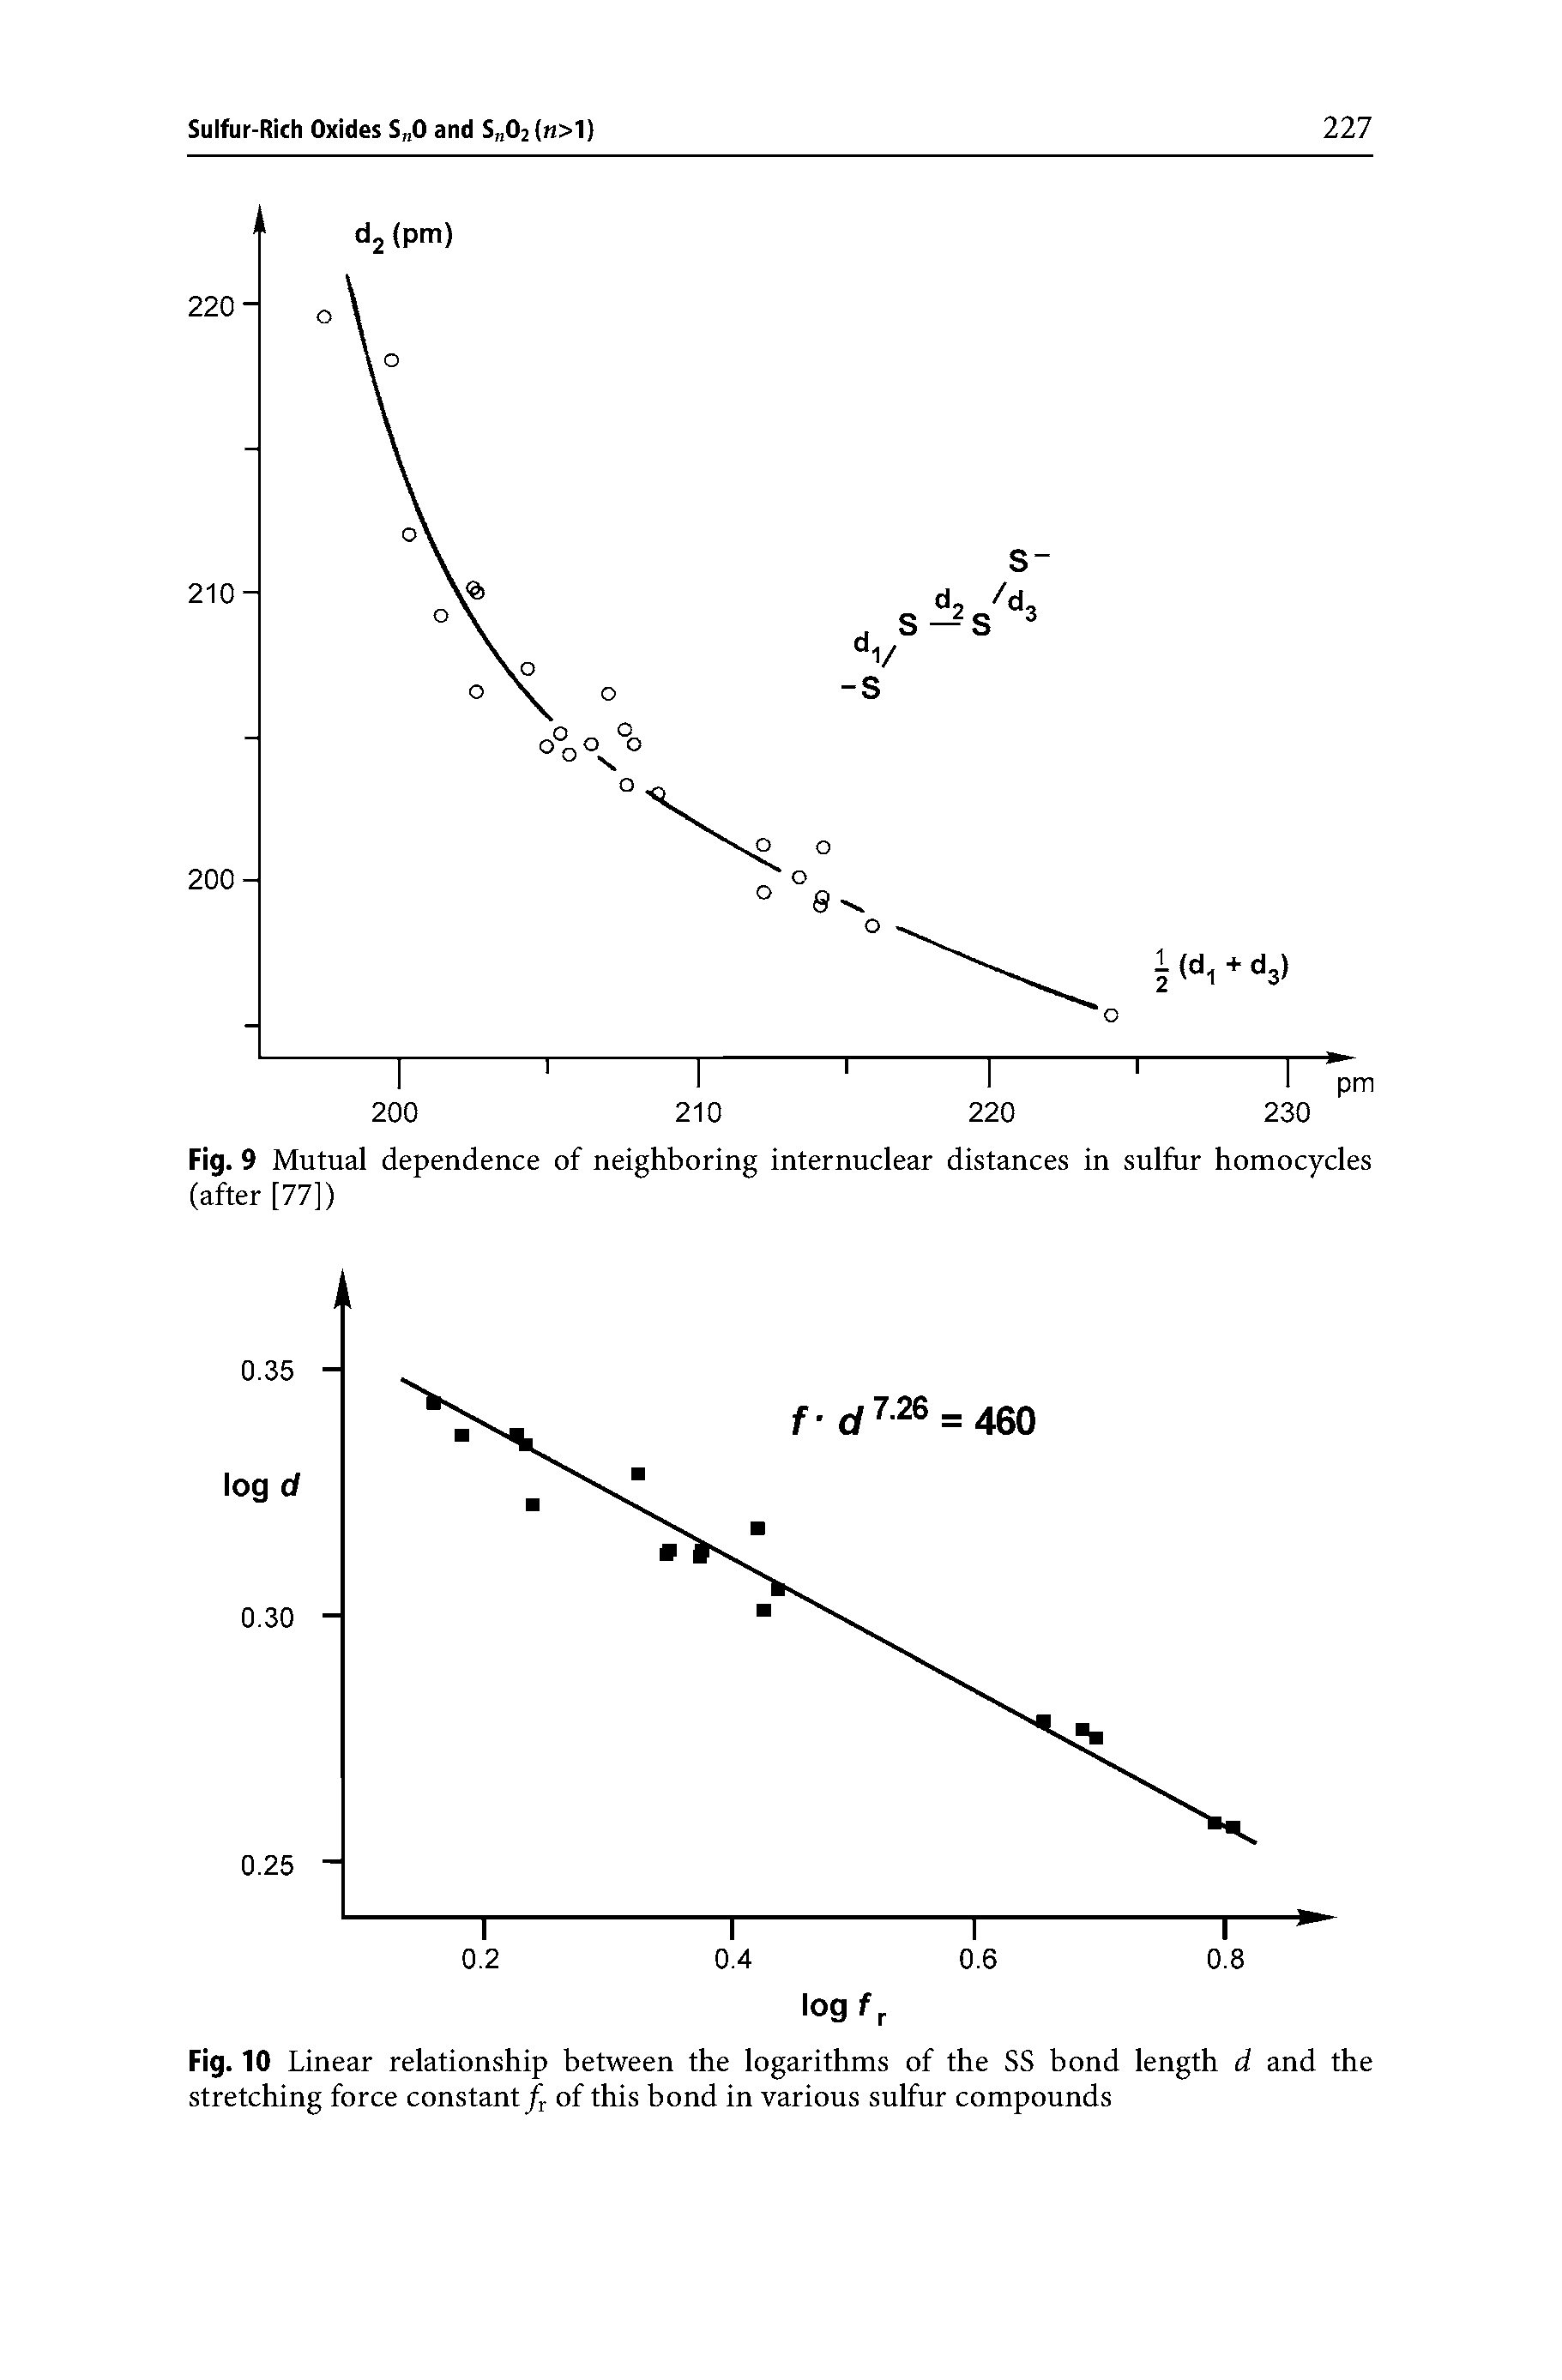 Fig. 10 Linear relationship between the logarithms of the SS bond length d and the stretching force constantof this bond in various sulfur compounds...